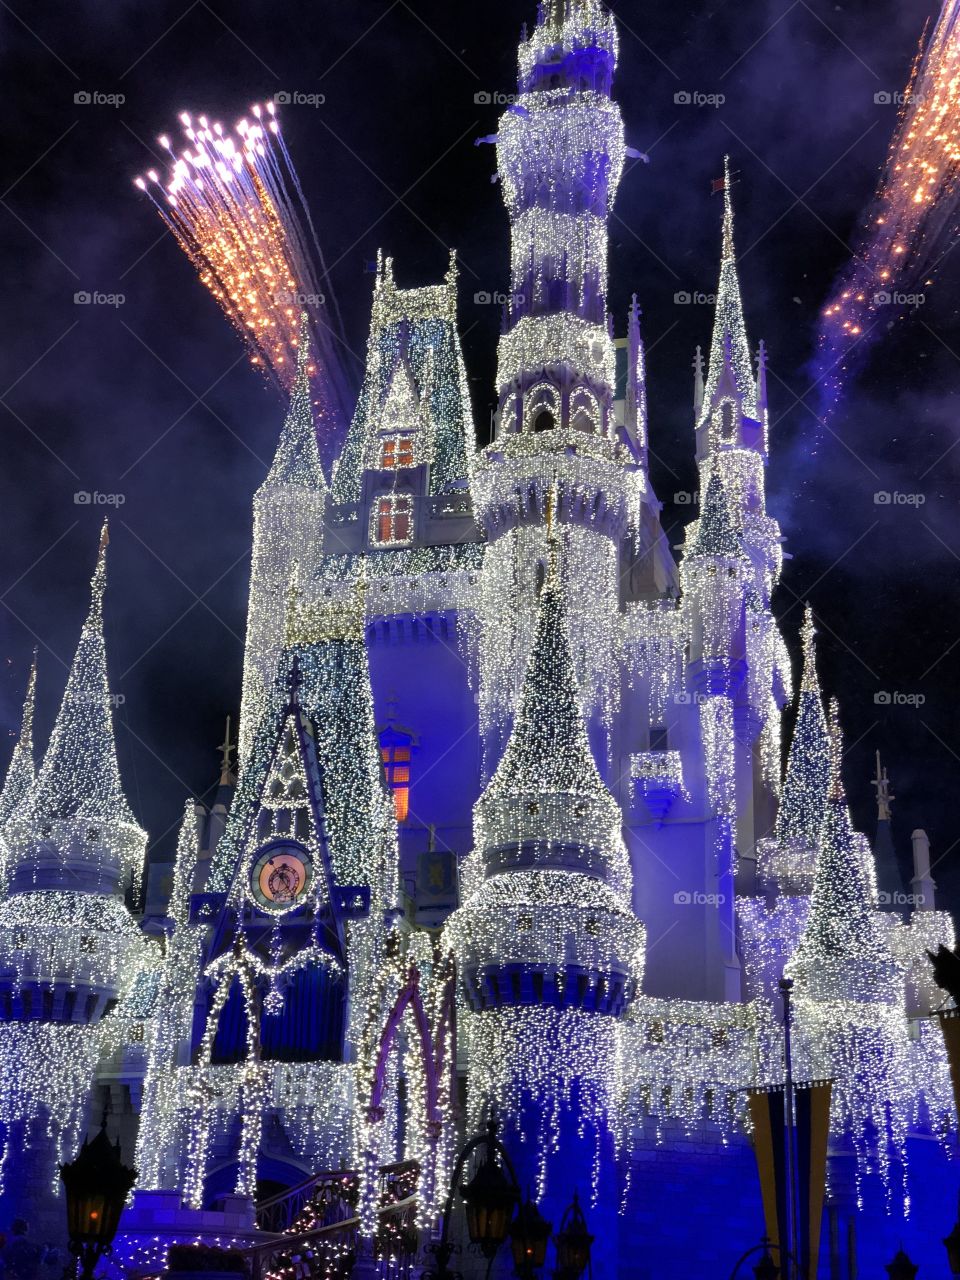 Disney world castle with icy lights and fireworks at night